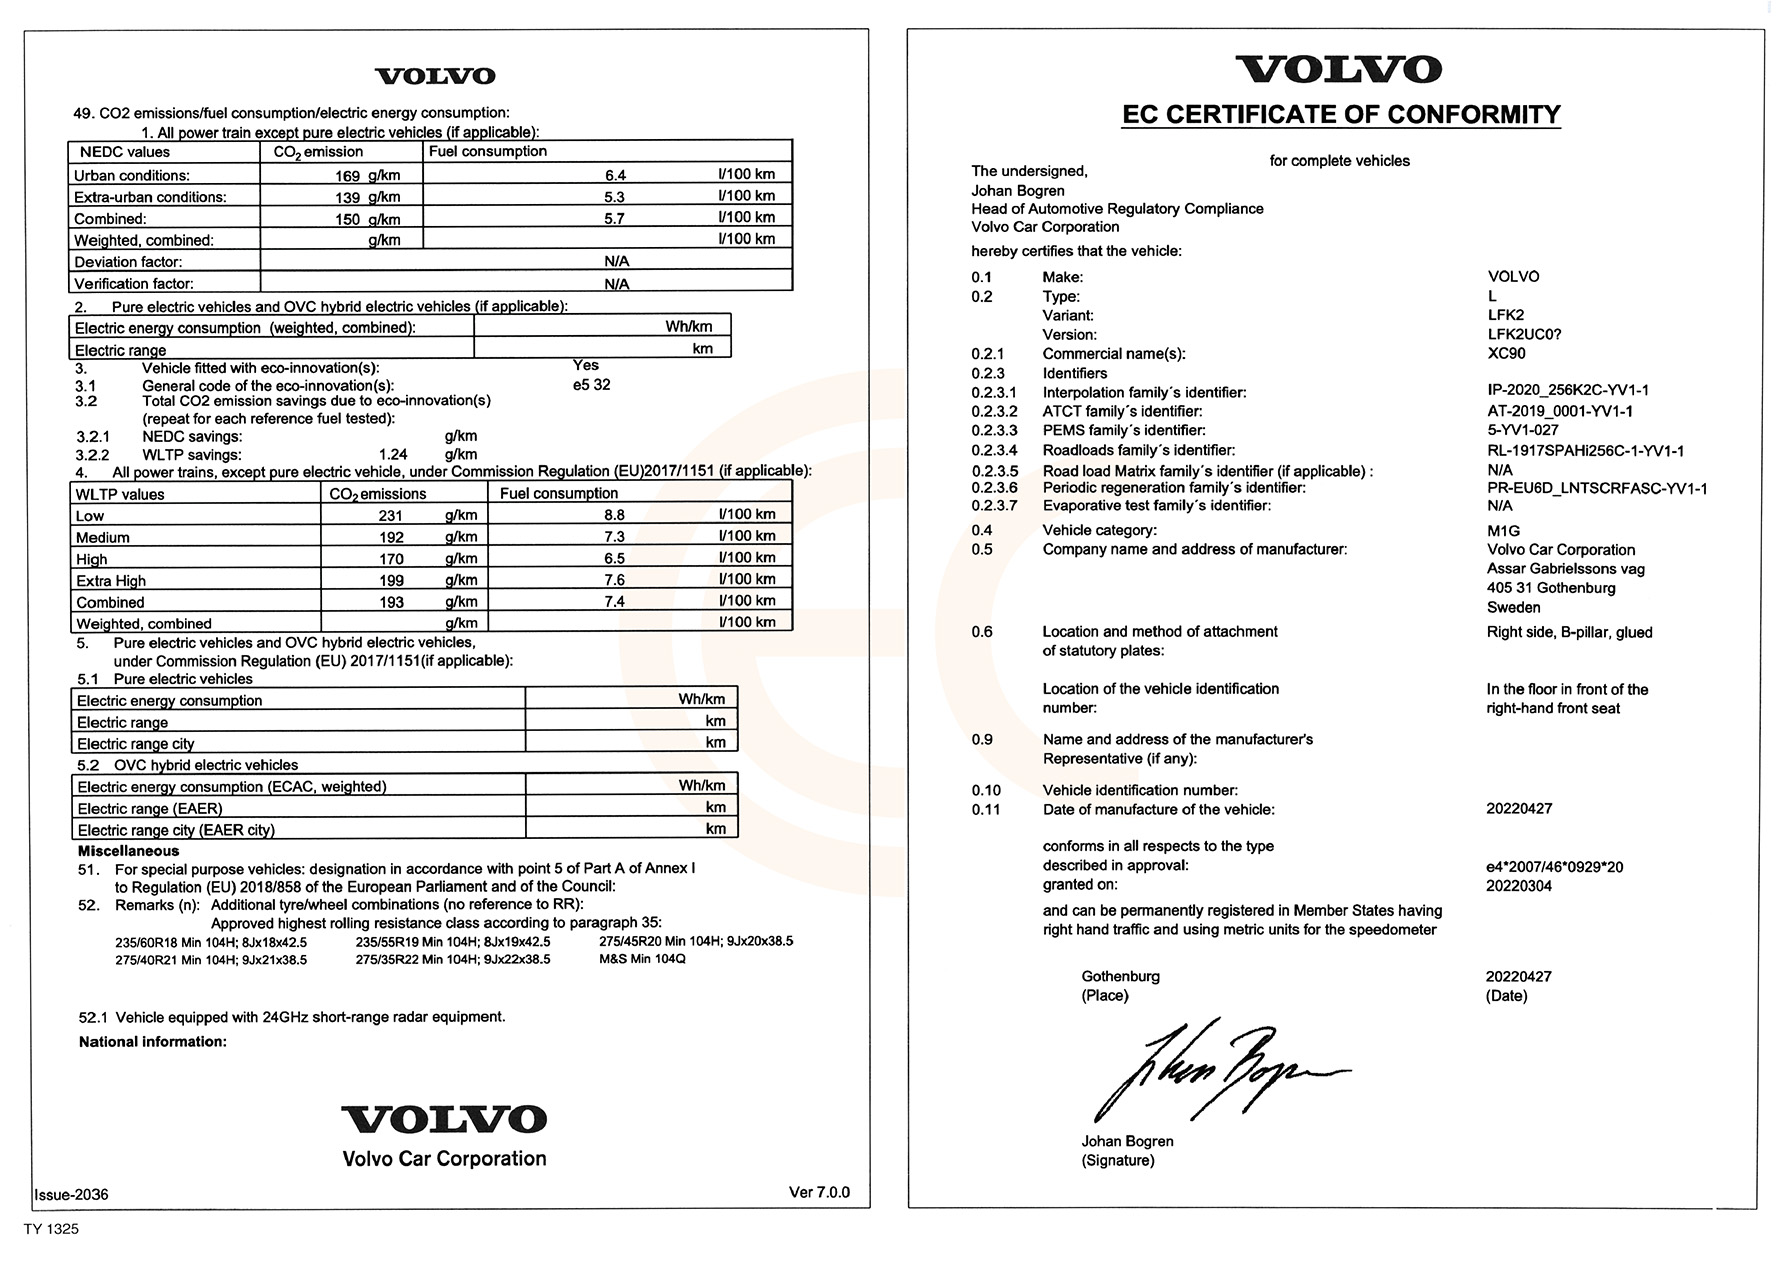 example of a volvo certificate of conformity